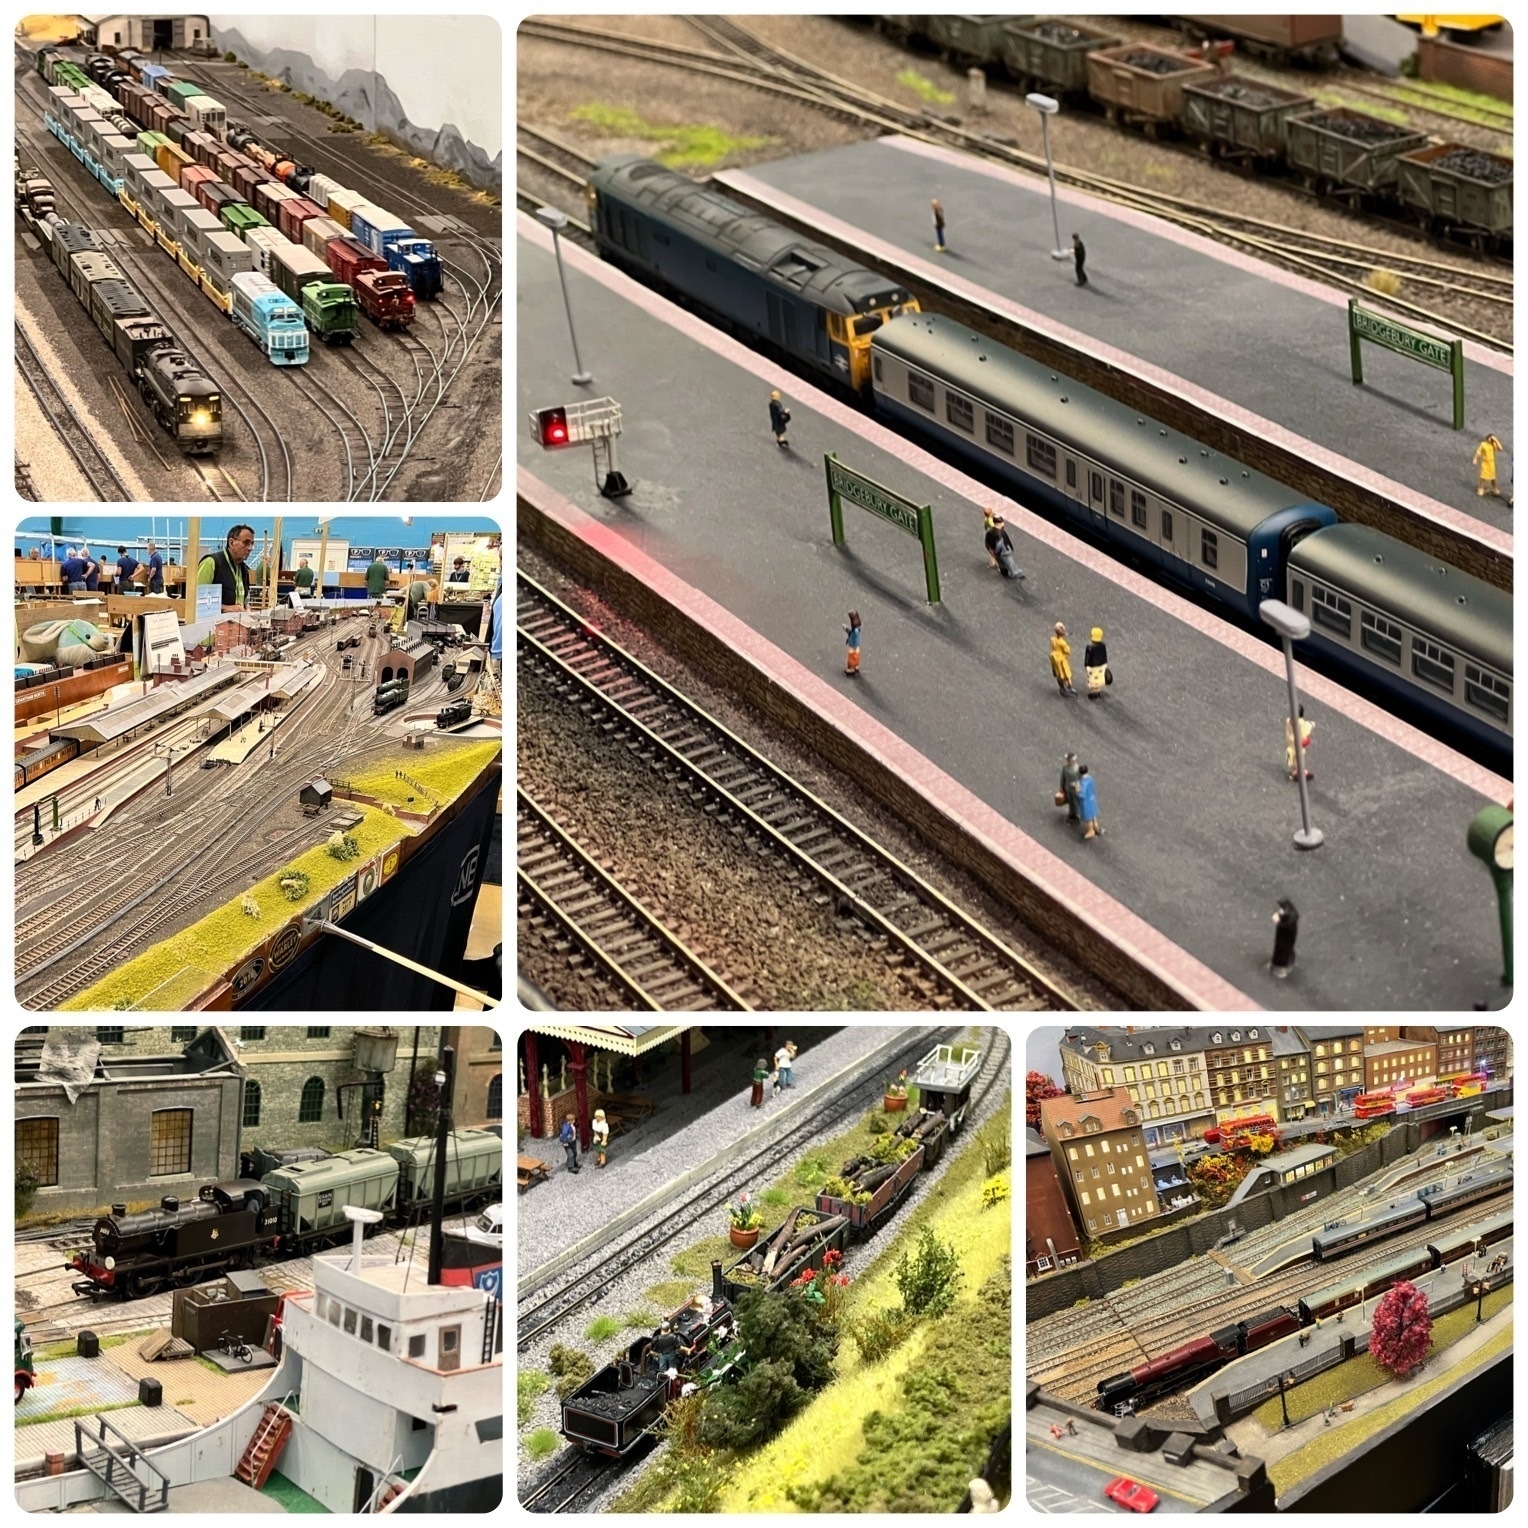 Collage of pictures showing various model railway layouts from the Fareham Model Railway Exhibition